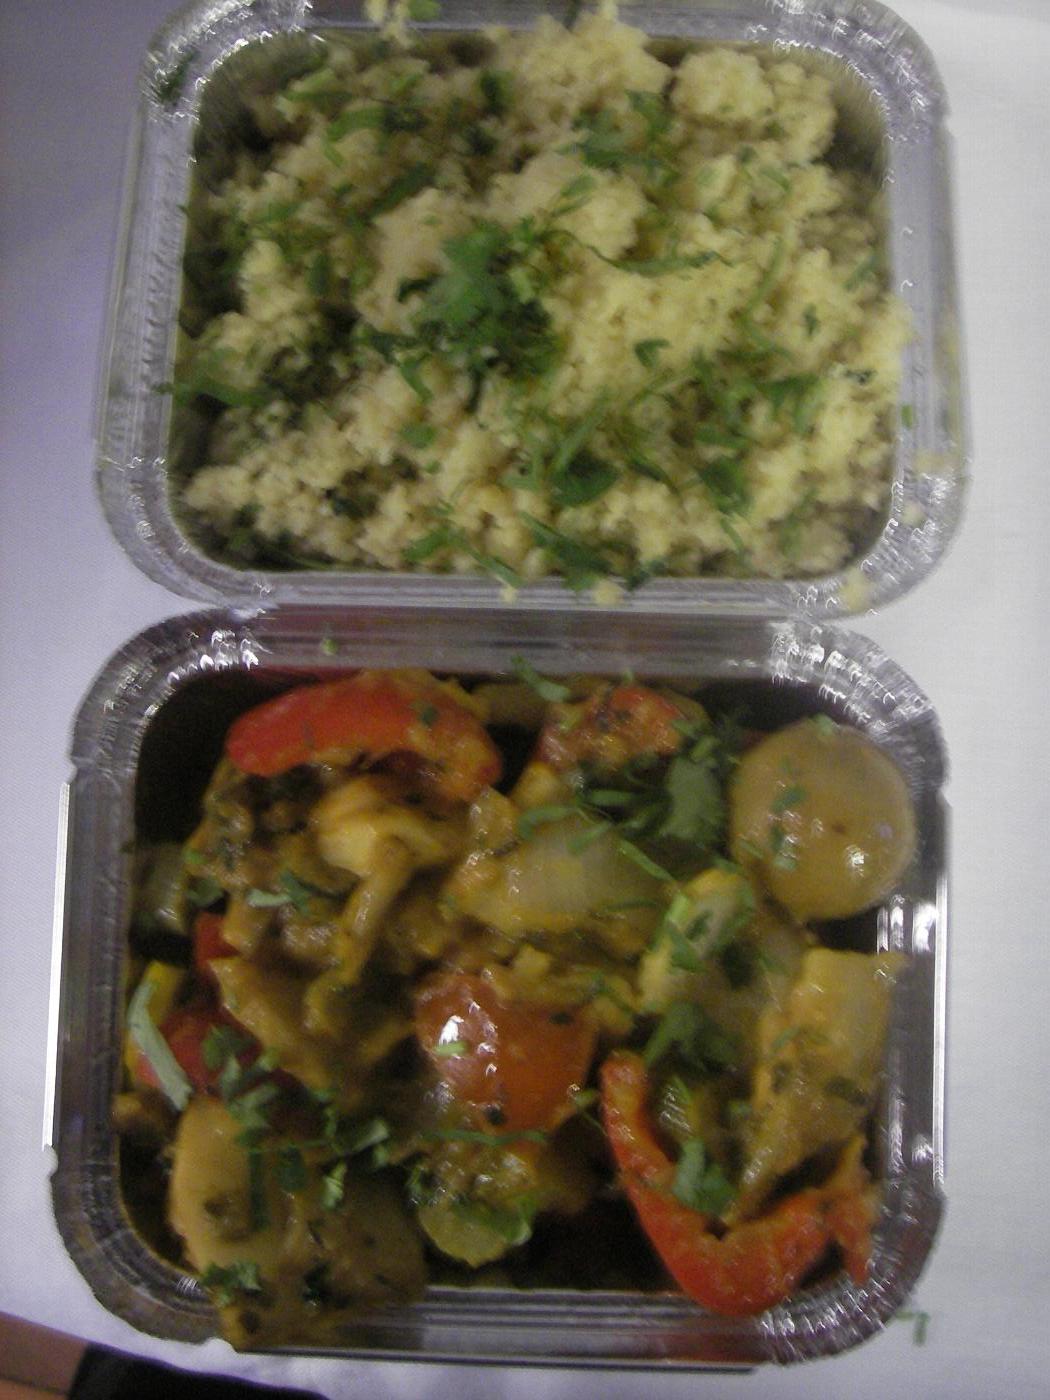 Moroccan vegetables and cous cous